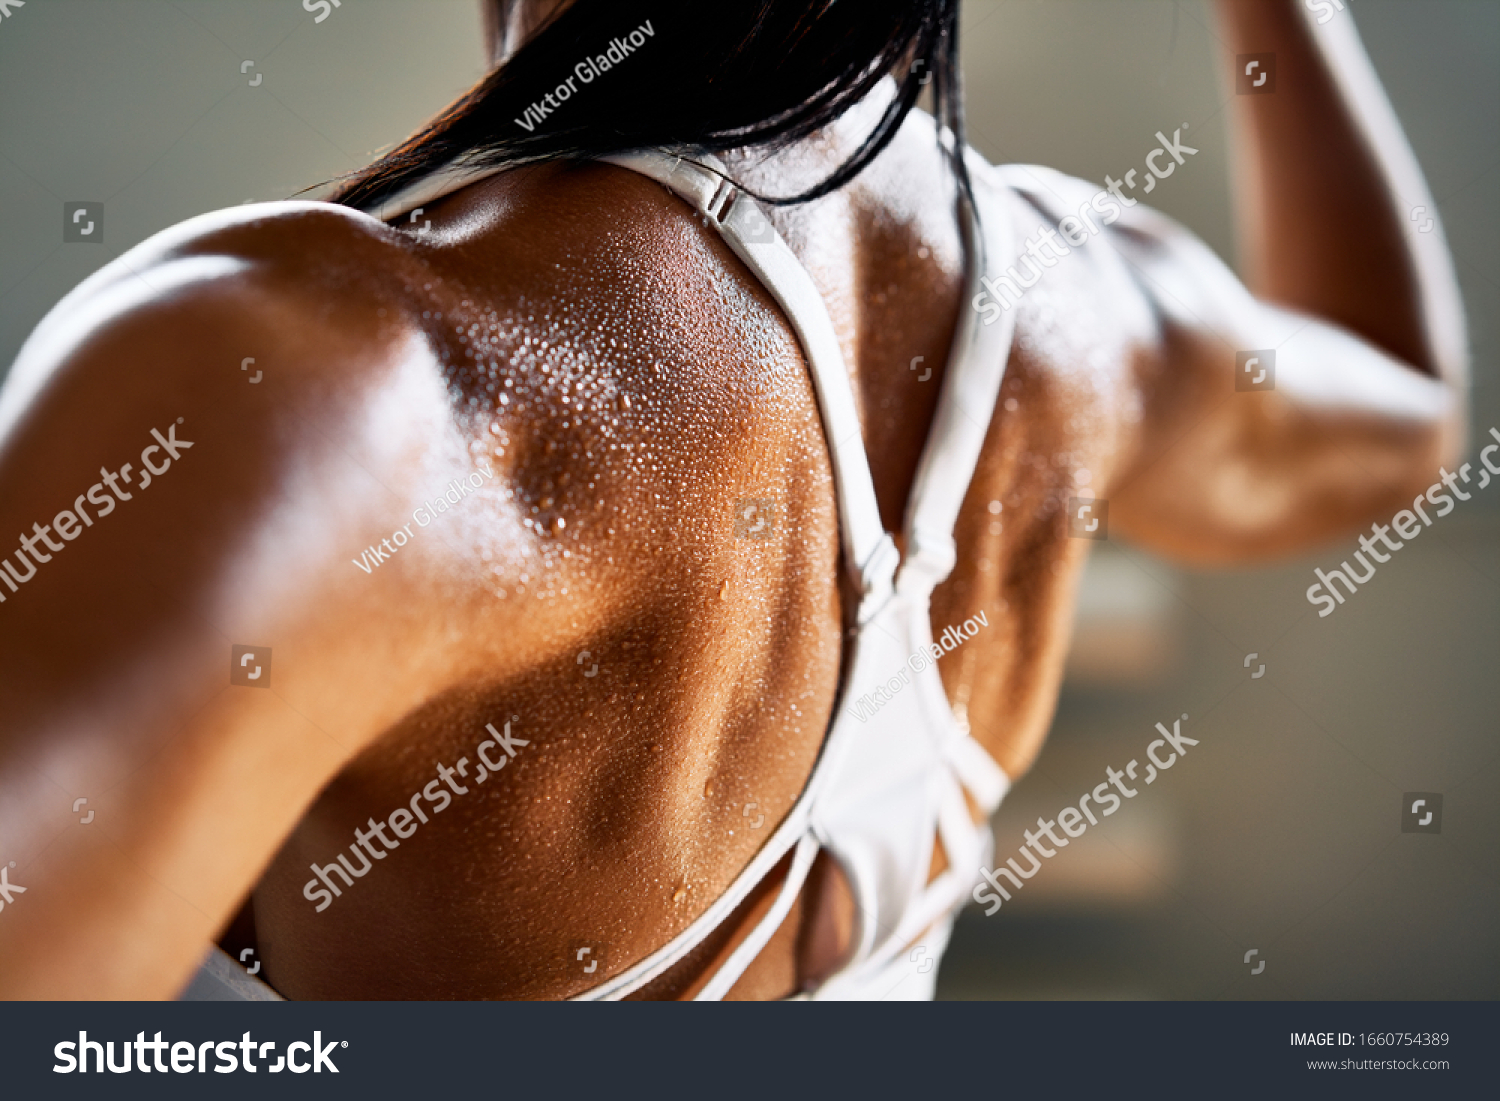 Close up of woman back with flexing her muscles in sweat on skin after workout. Female bodybuilder with perfect biceps                           #1660754389